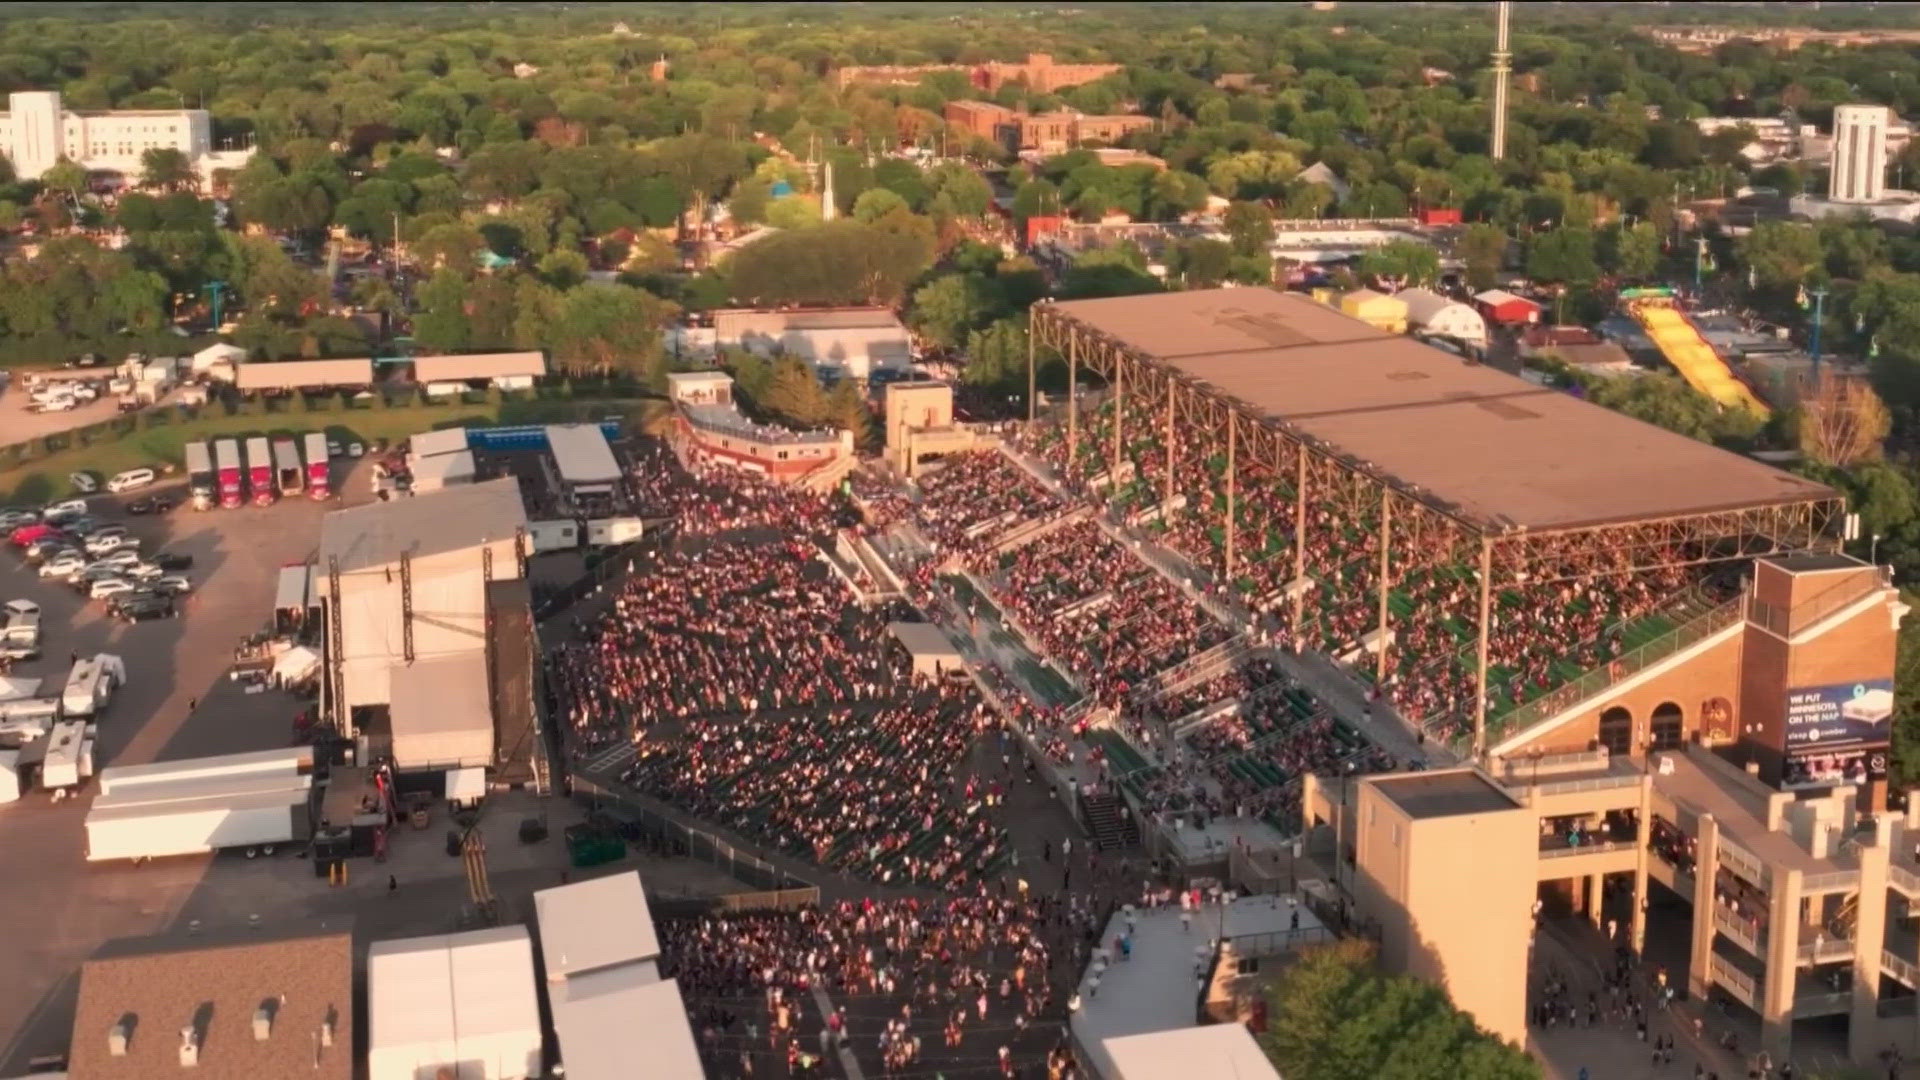 The last Grandstand performer for this year's fair will be released mid-June but music history at the Great Minnesota Get-Together goes back more than 60 years.